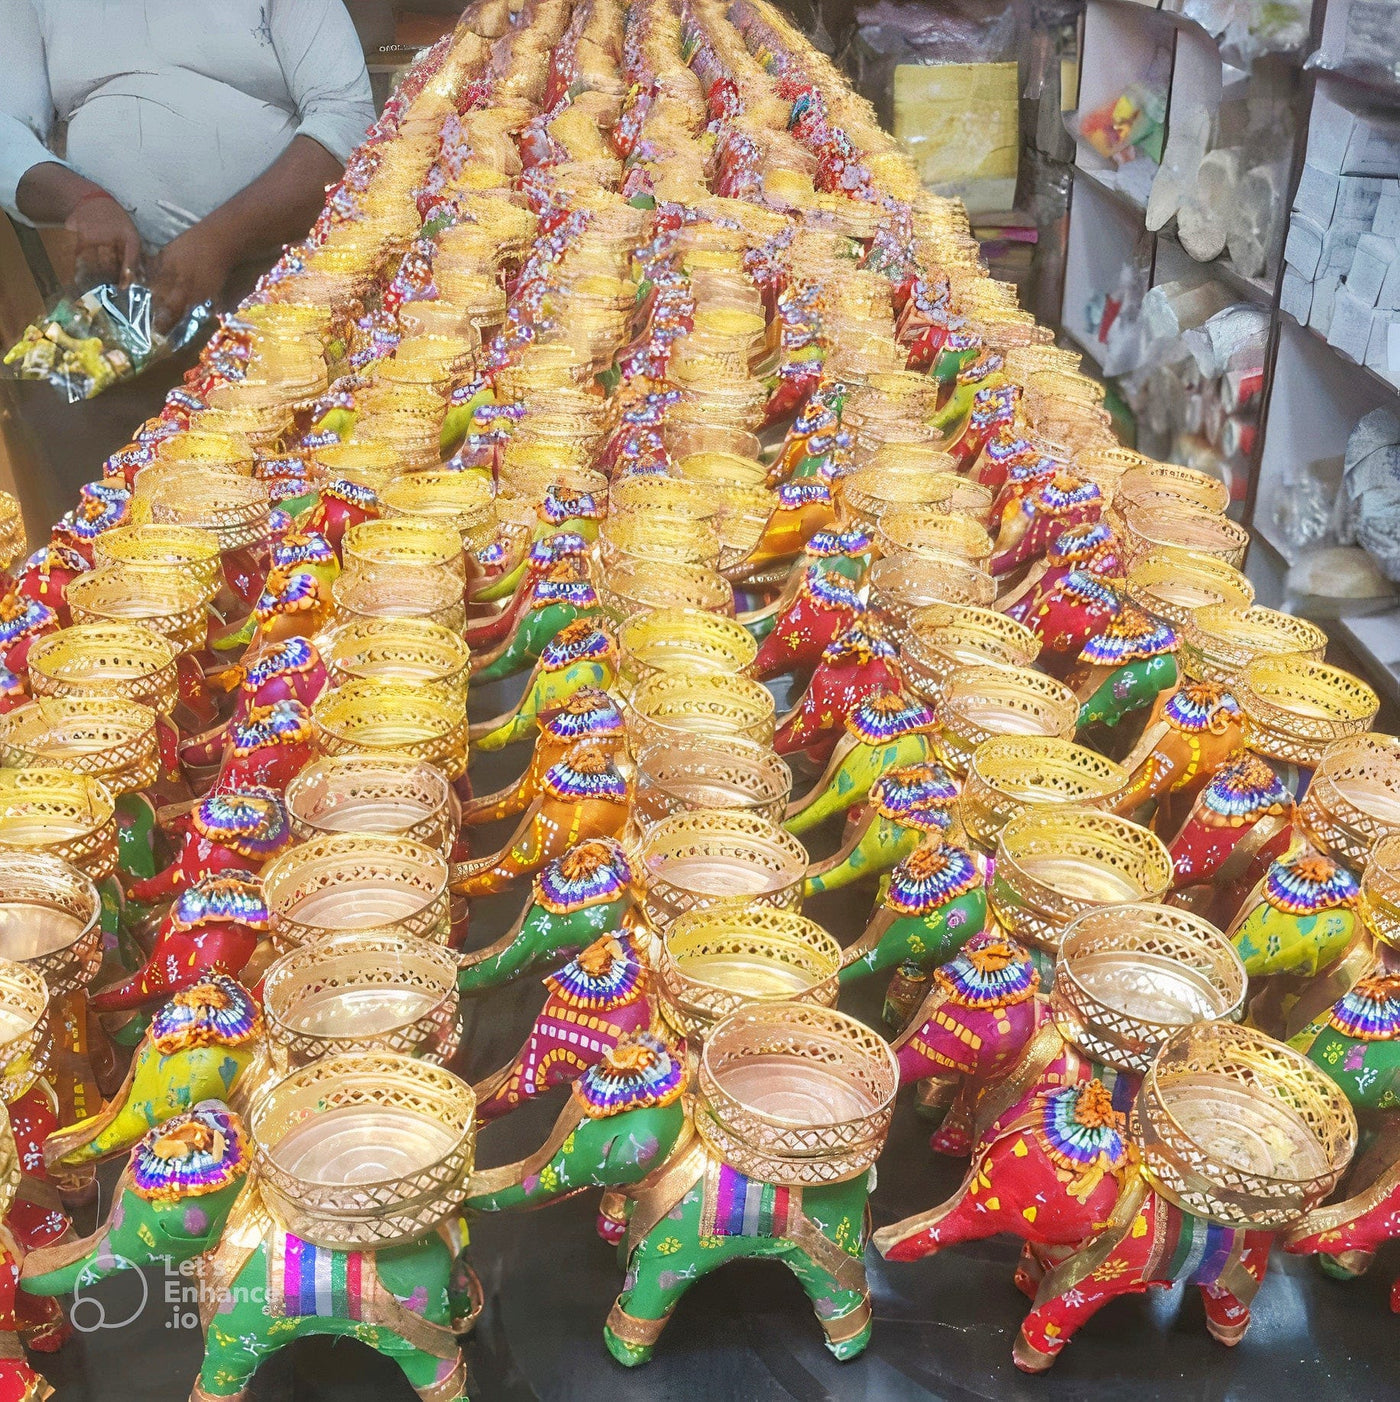 New Jaipur Handicraft Candle Holders Pack of 400 Elephant Tea light Candle Holders at Rs 28 each ( 400 tealight 🕯Candles Included)